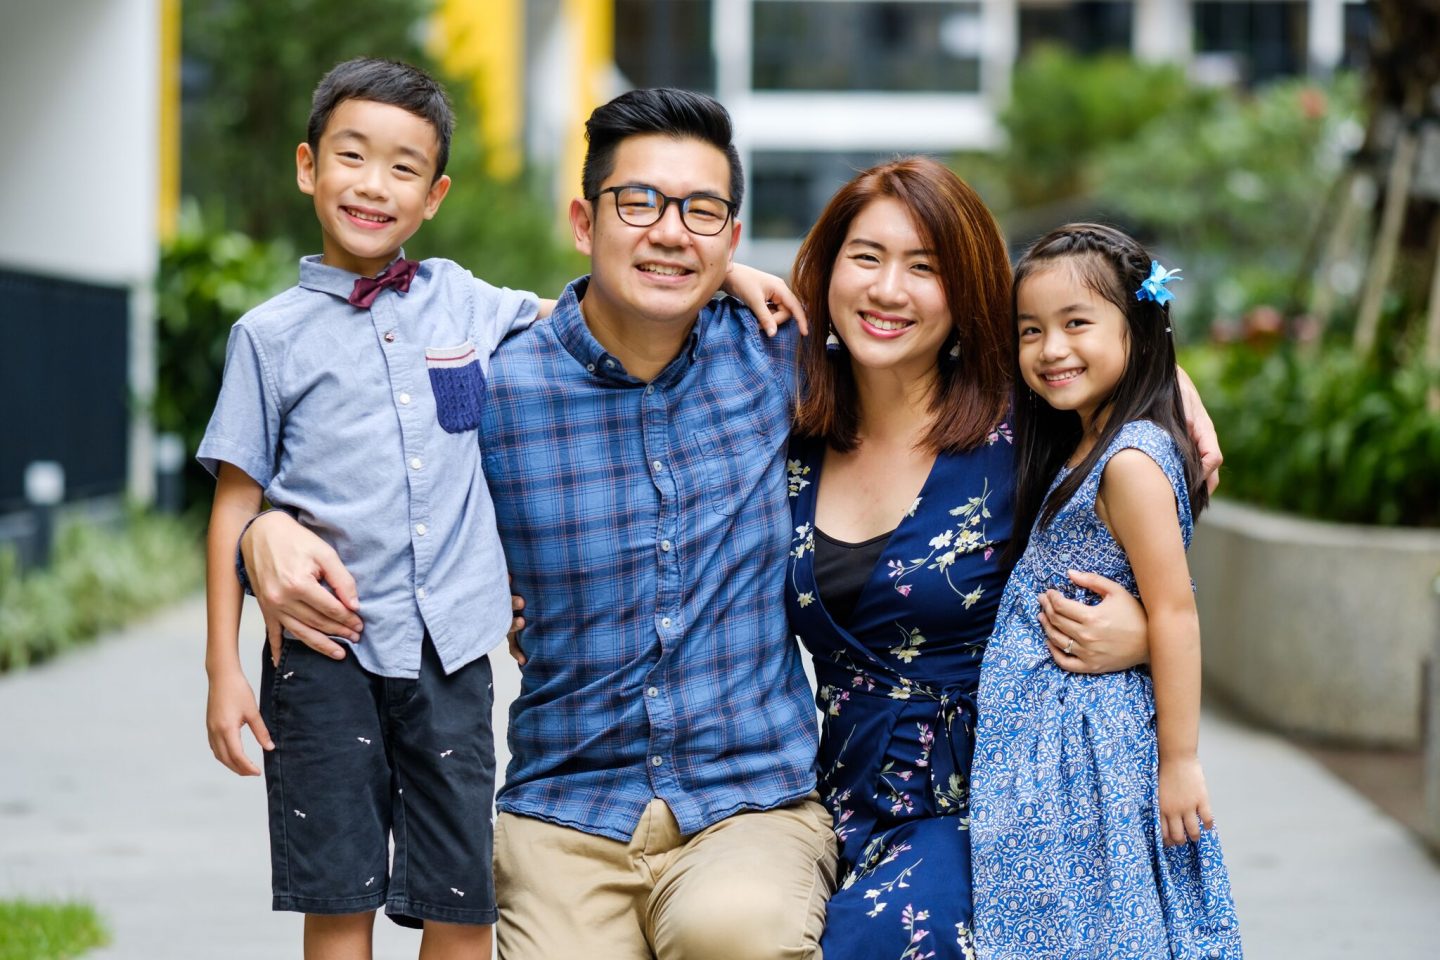 Elvin snf Esther Foong, with their son Nathan and daughter Phoebe. Their family started 2021 with a plan to be more intentional in their lives and their faith. Photo courtesy of the Foongs. 